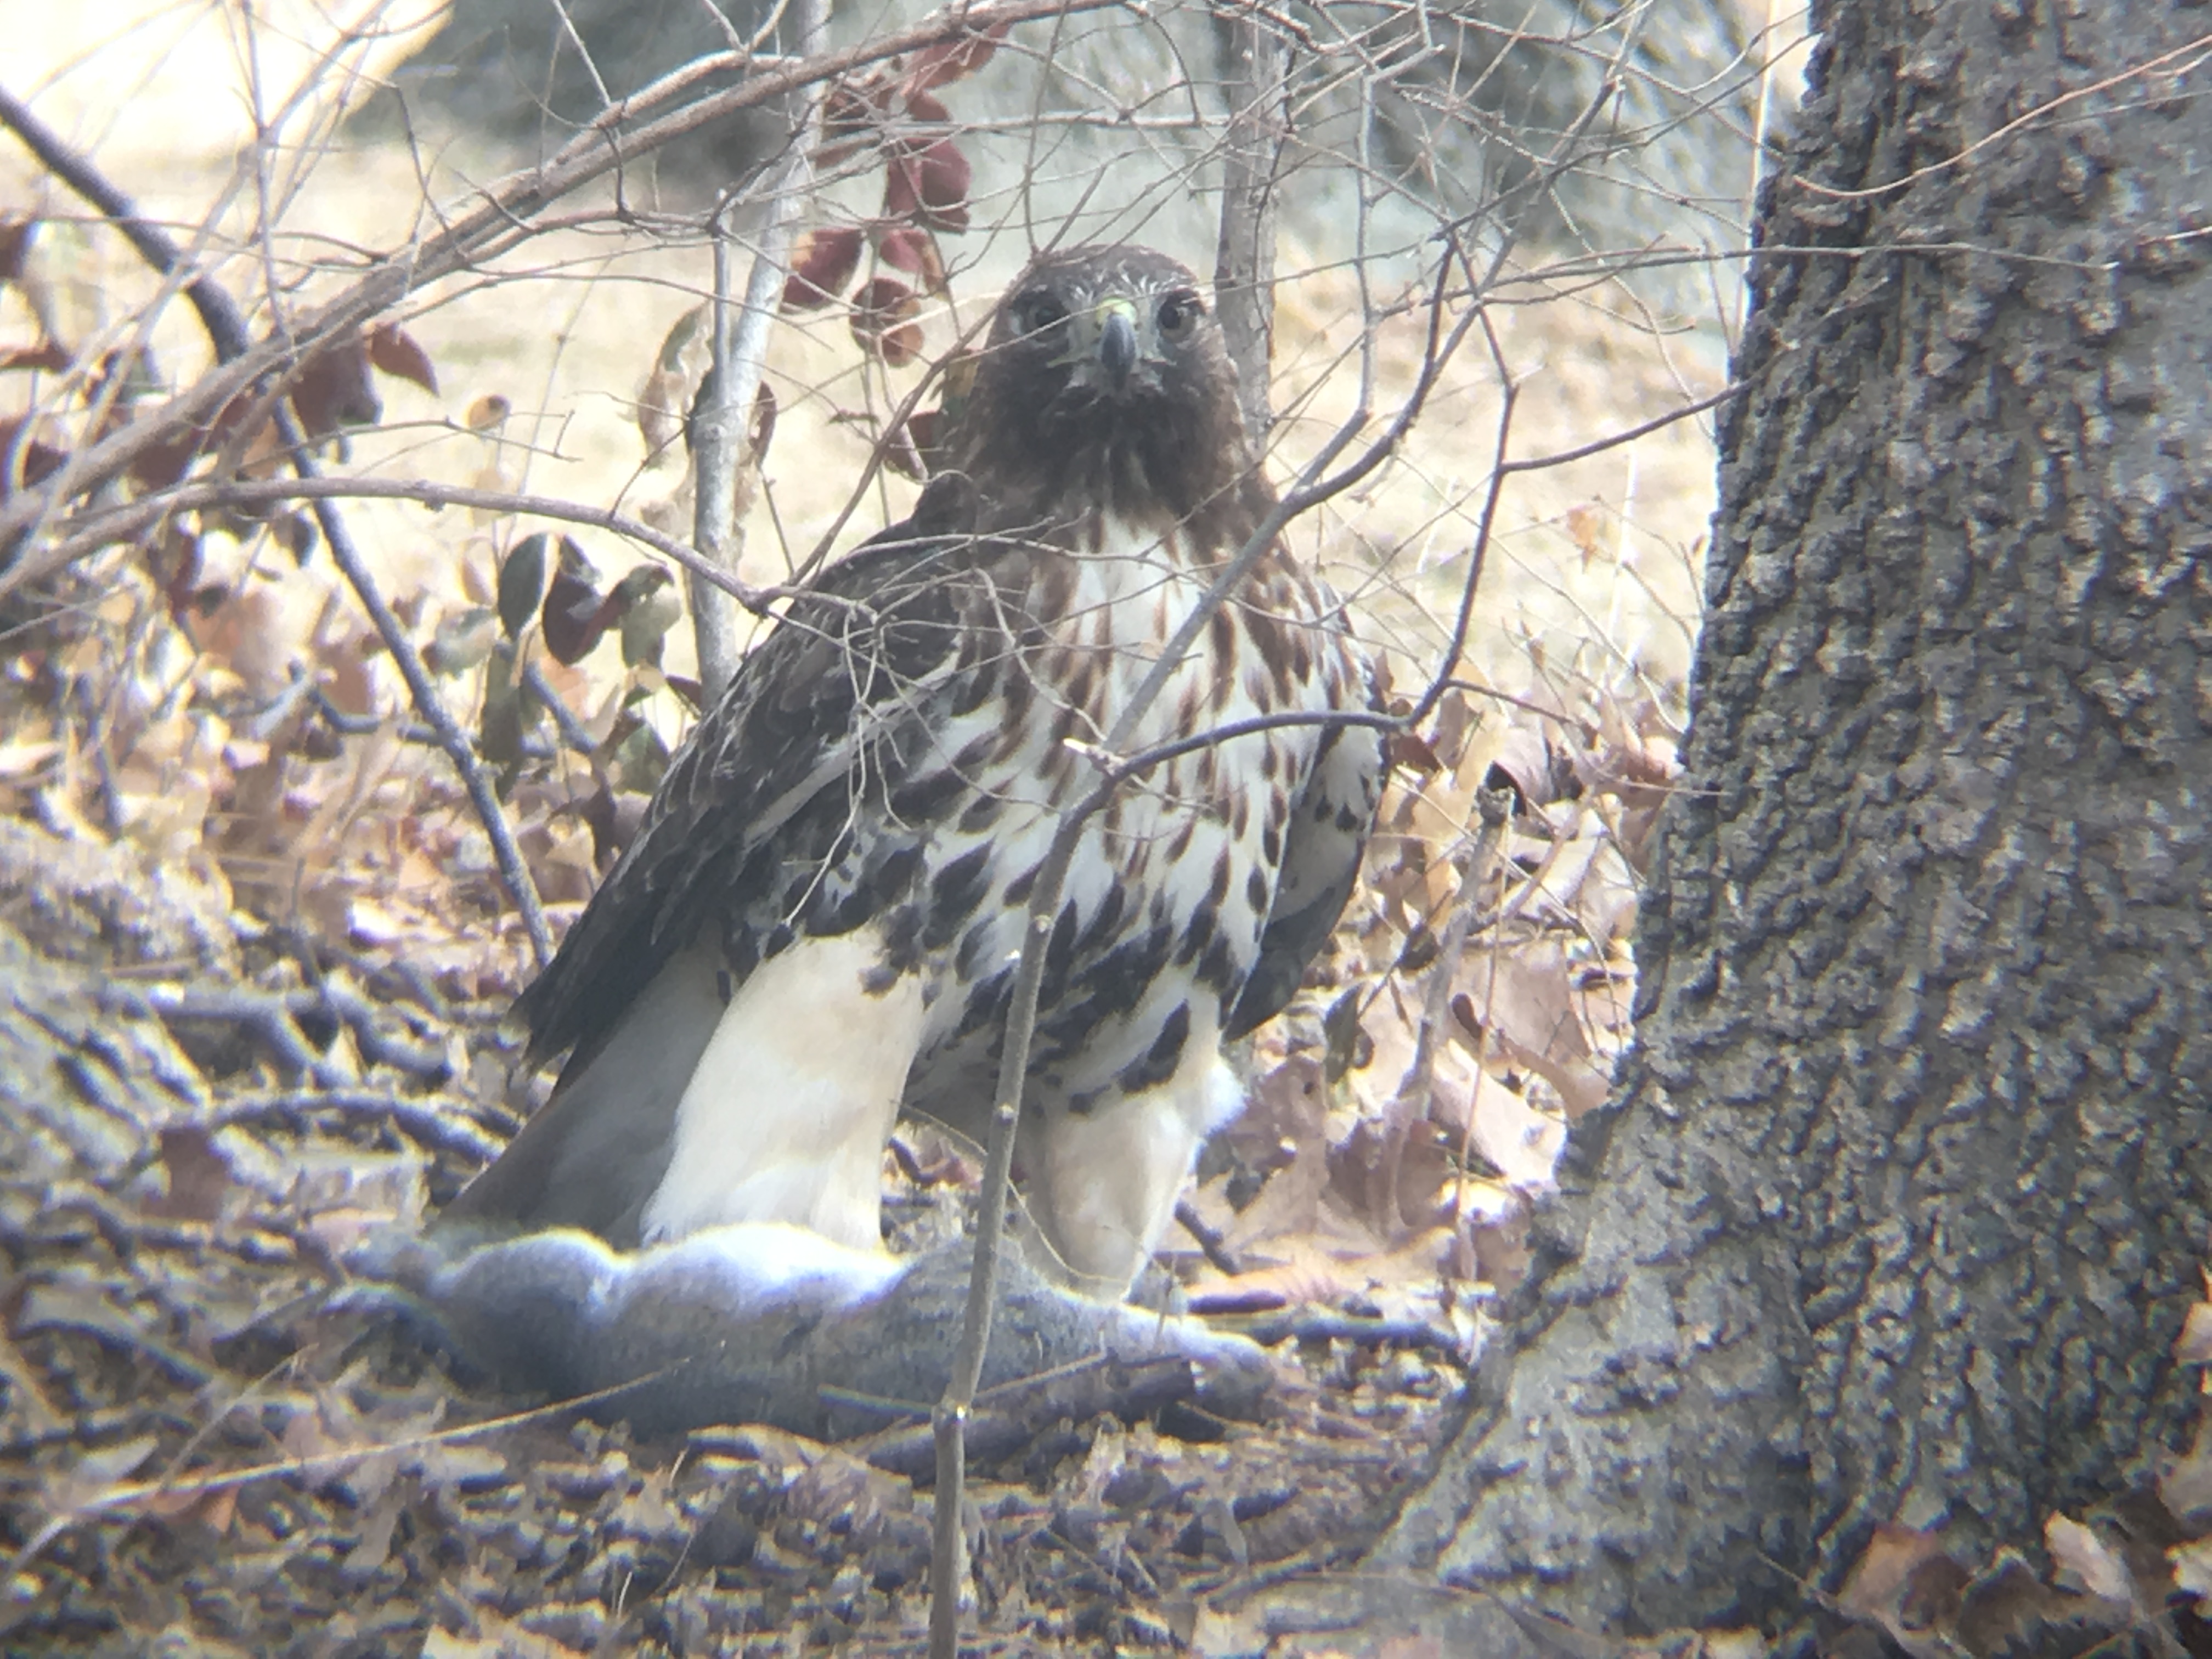 Red tailed hawk eating a grey squirrel